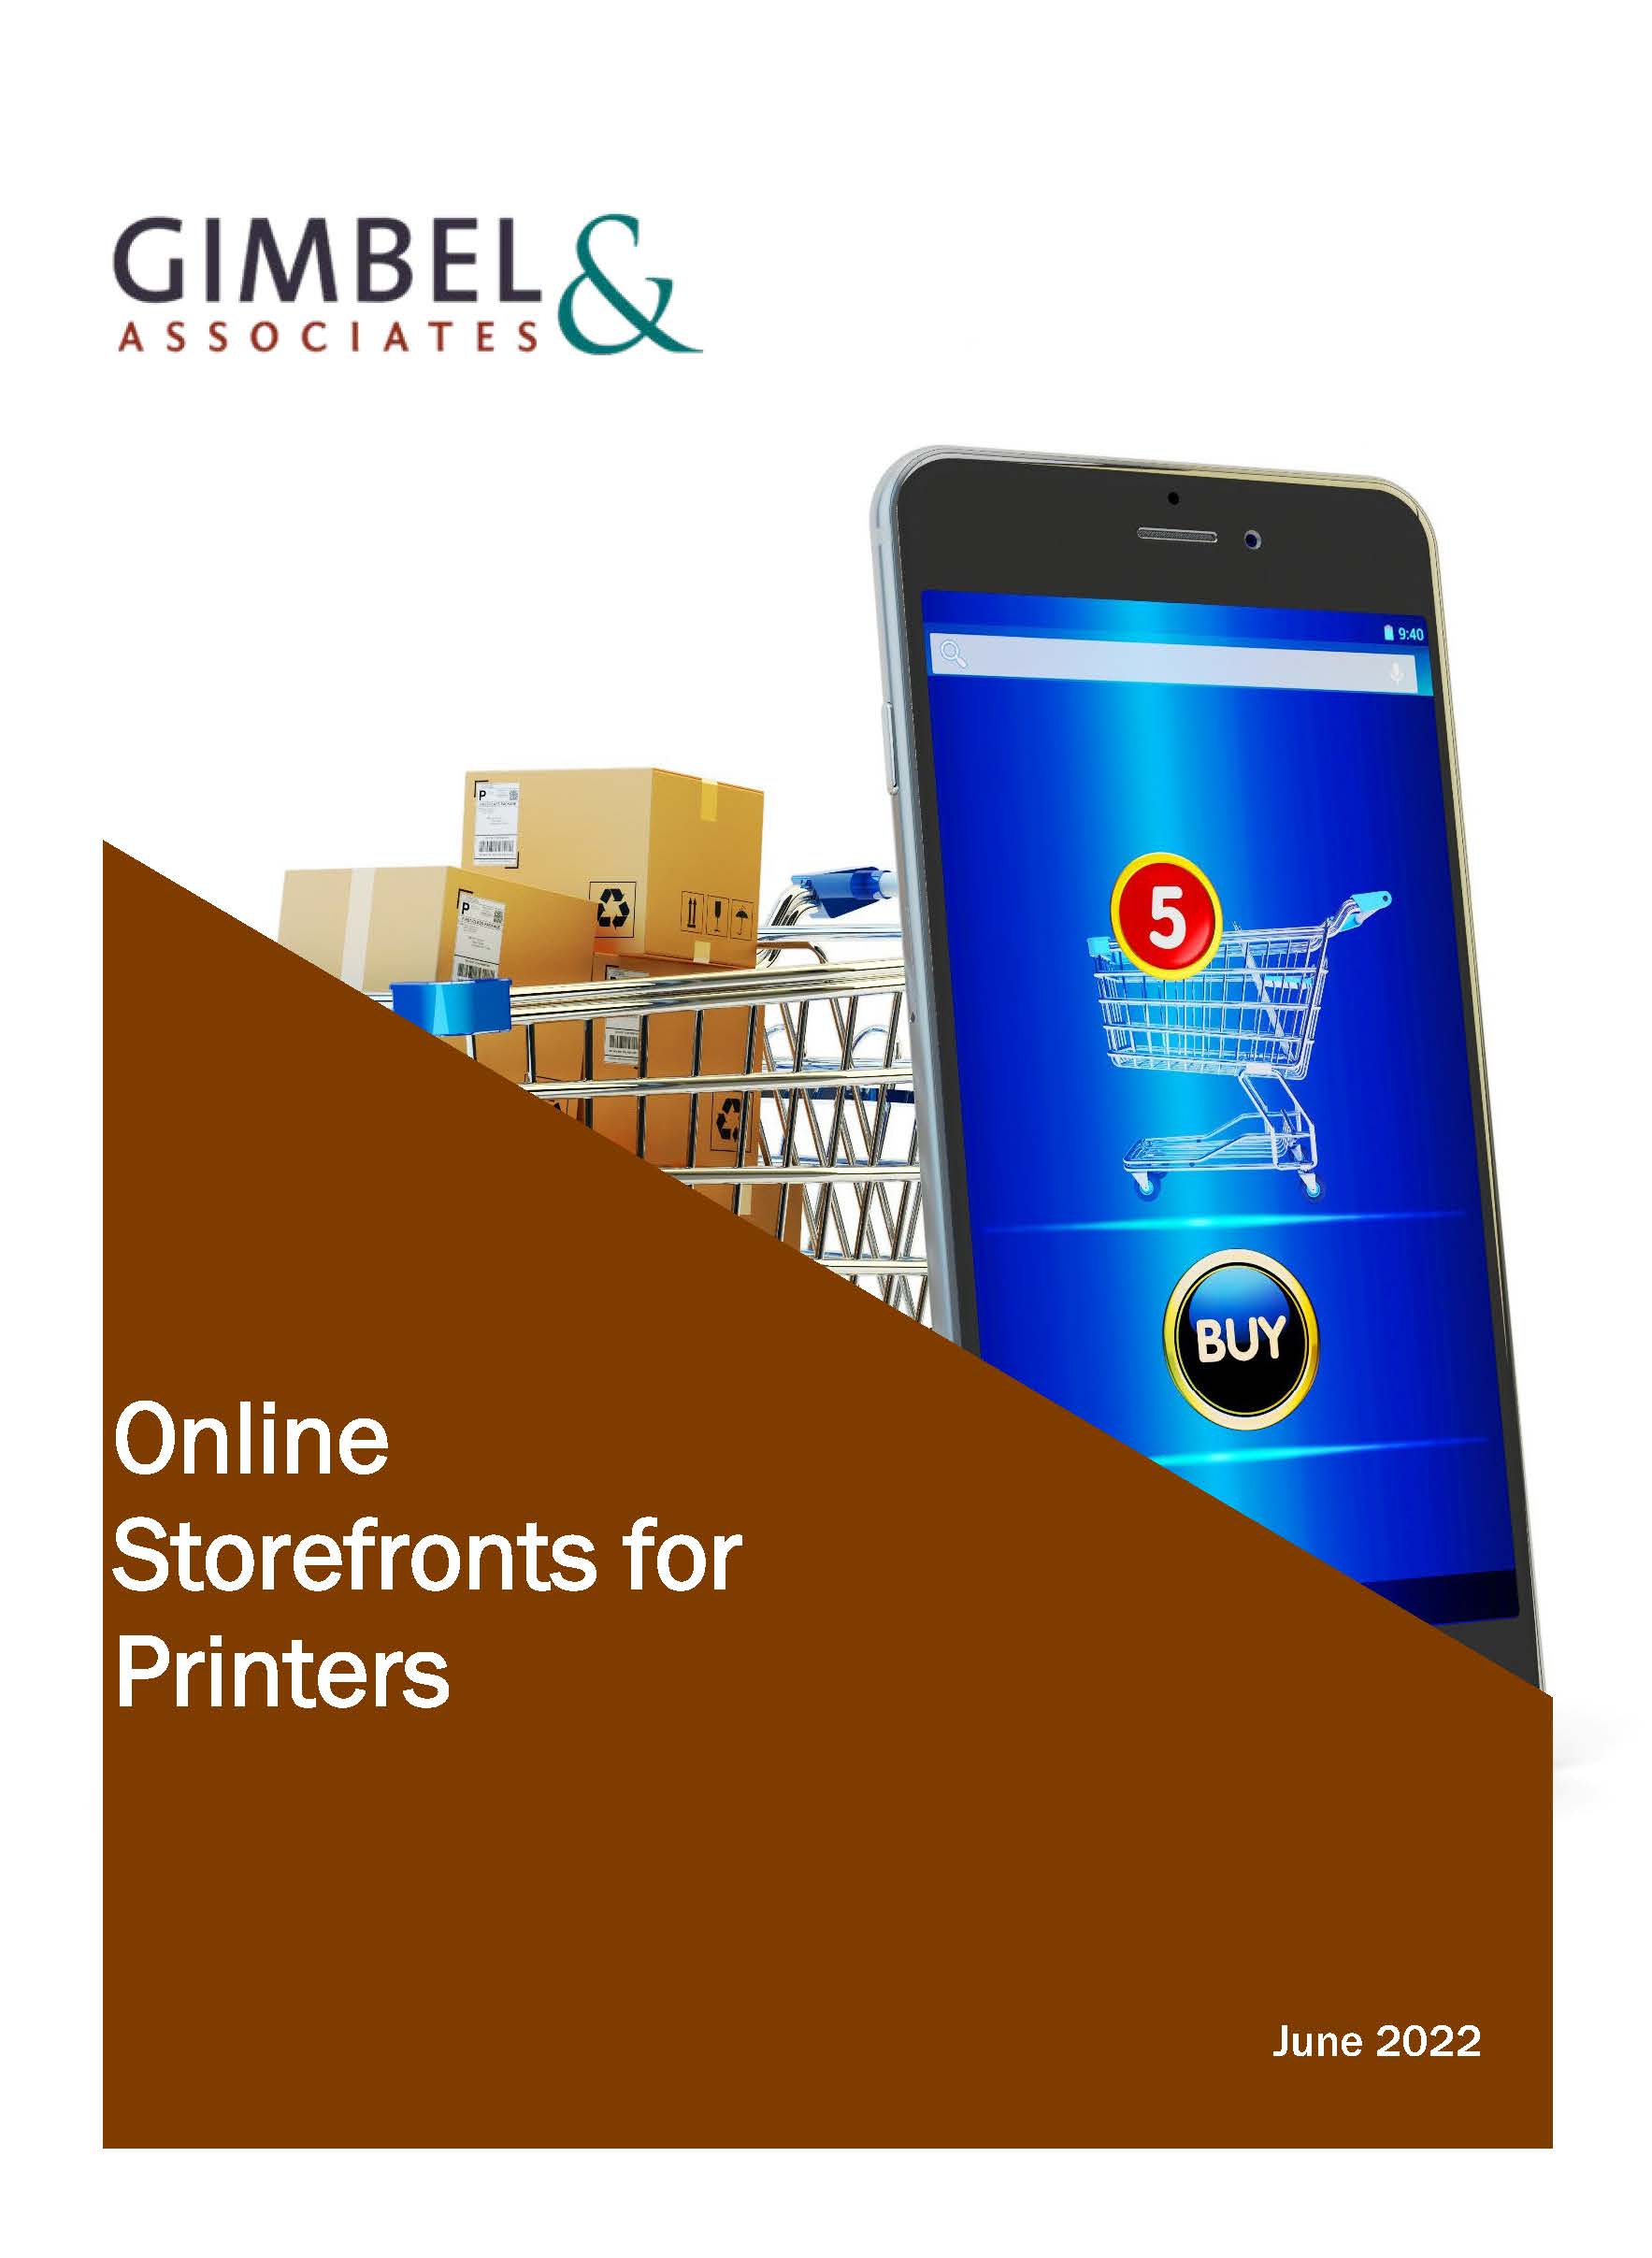 Online Storefronts cover_Page_01